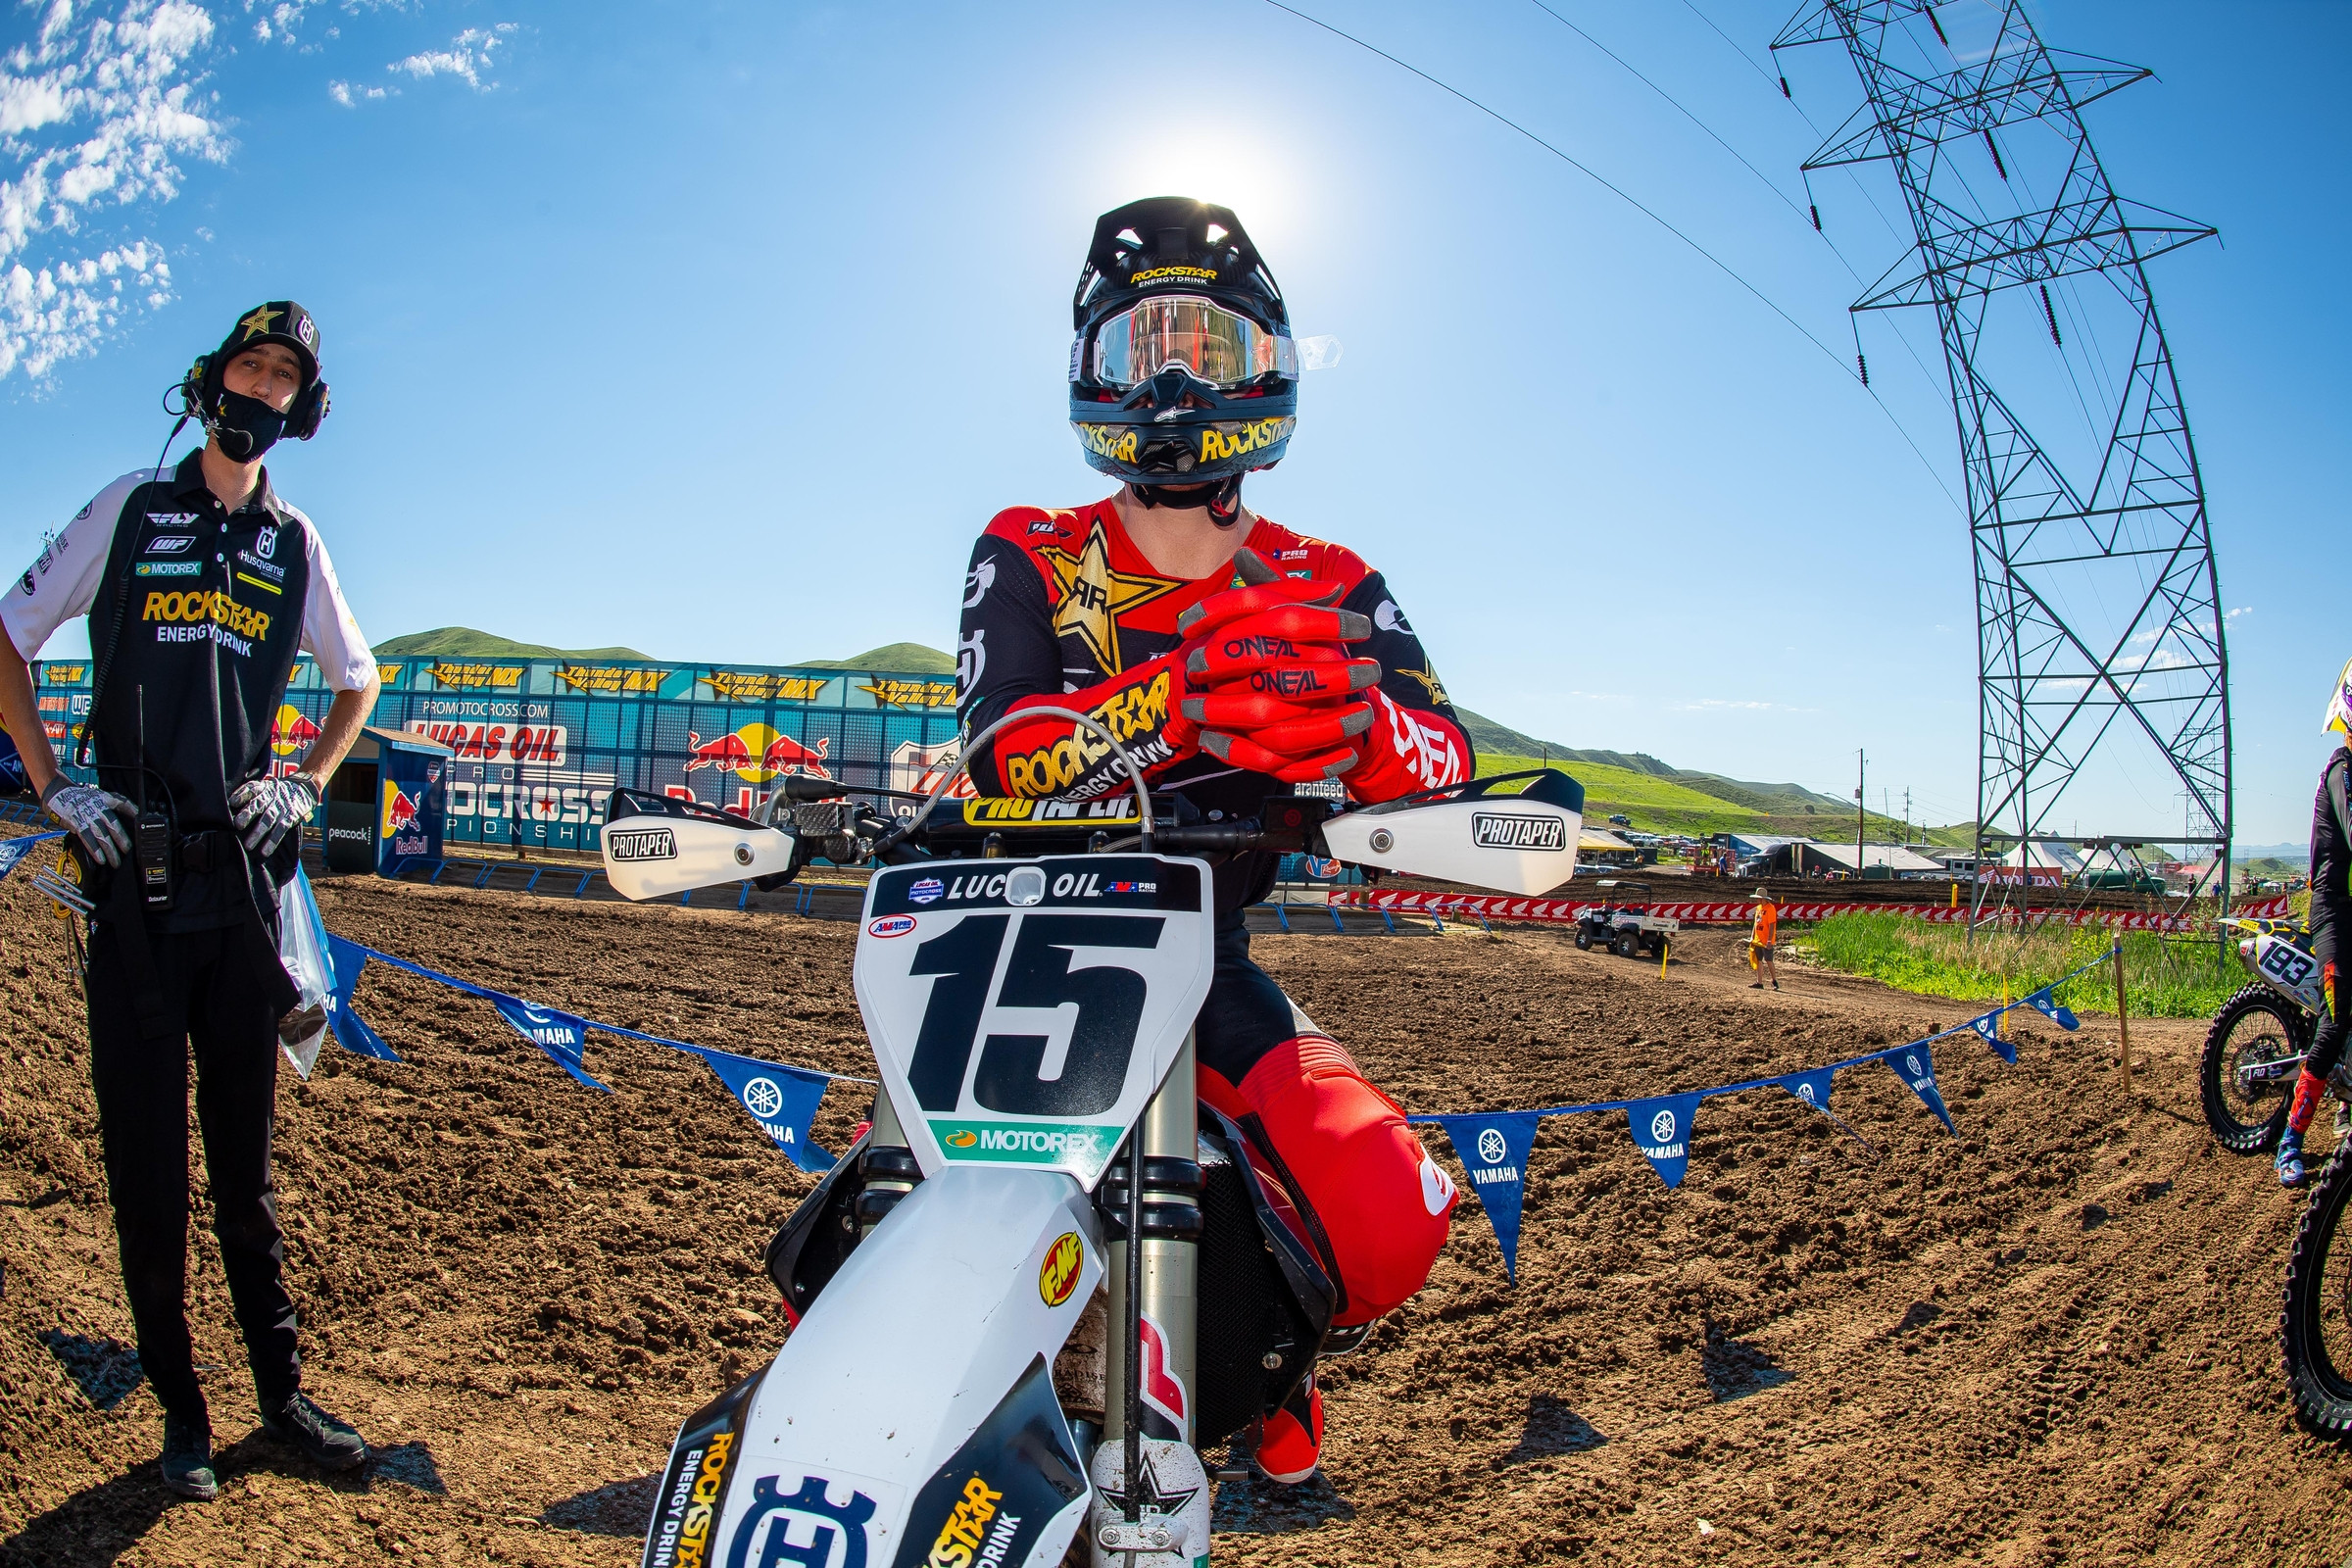 2021 High Point National 250 & 450 Class Entry Lists Racer X